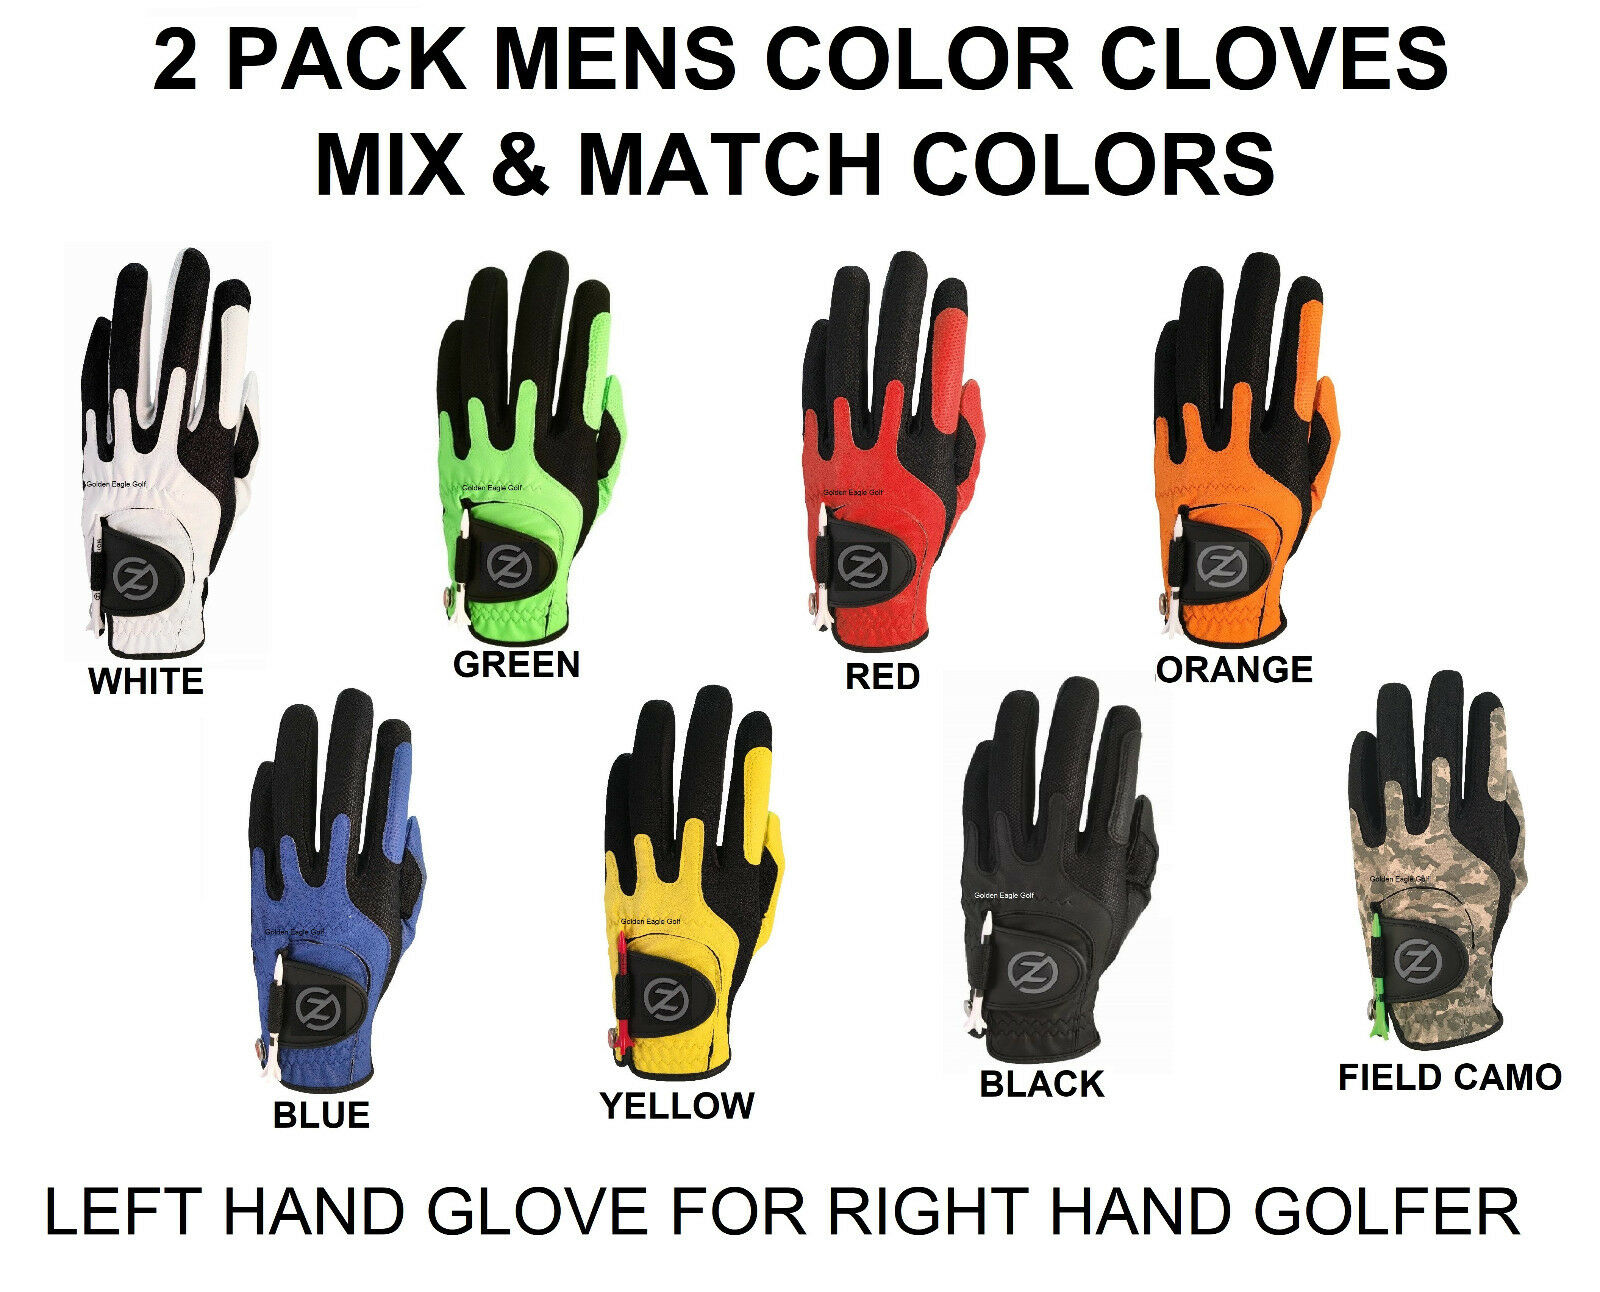 Zero Friction Compression-fit Golf Glove 8 Color One Size Fits All 2 Pack